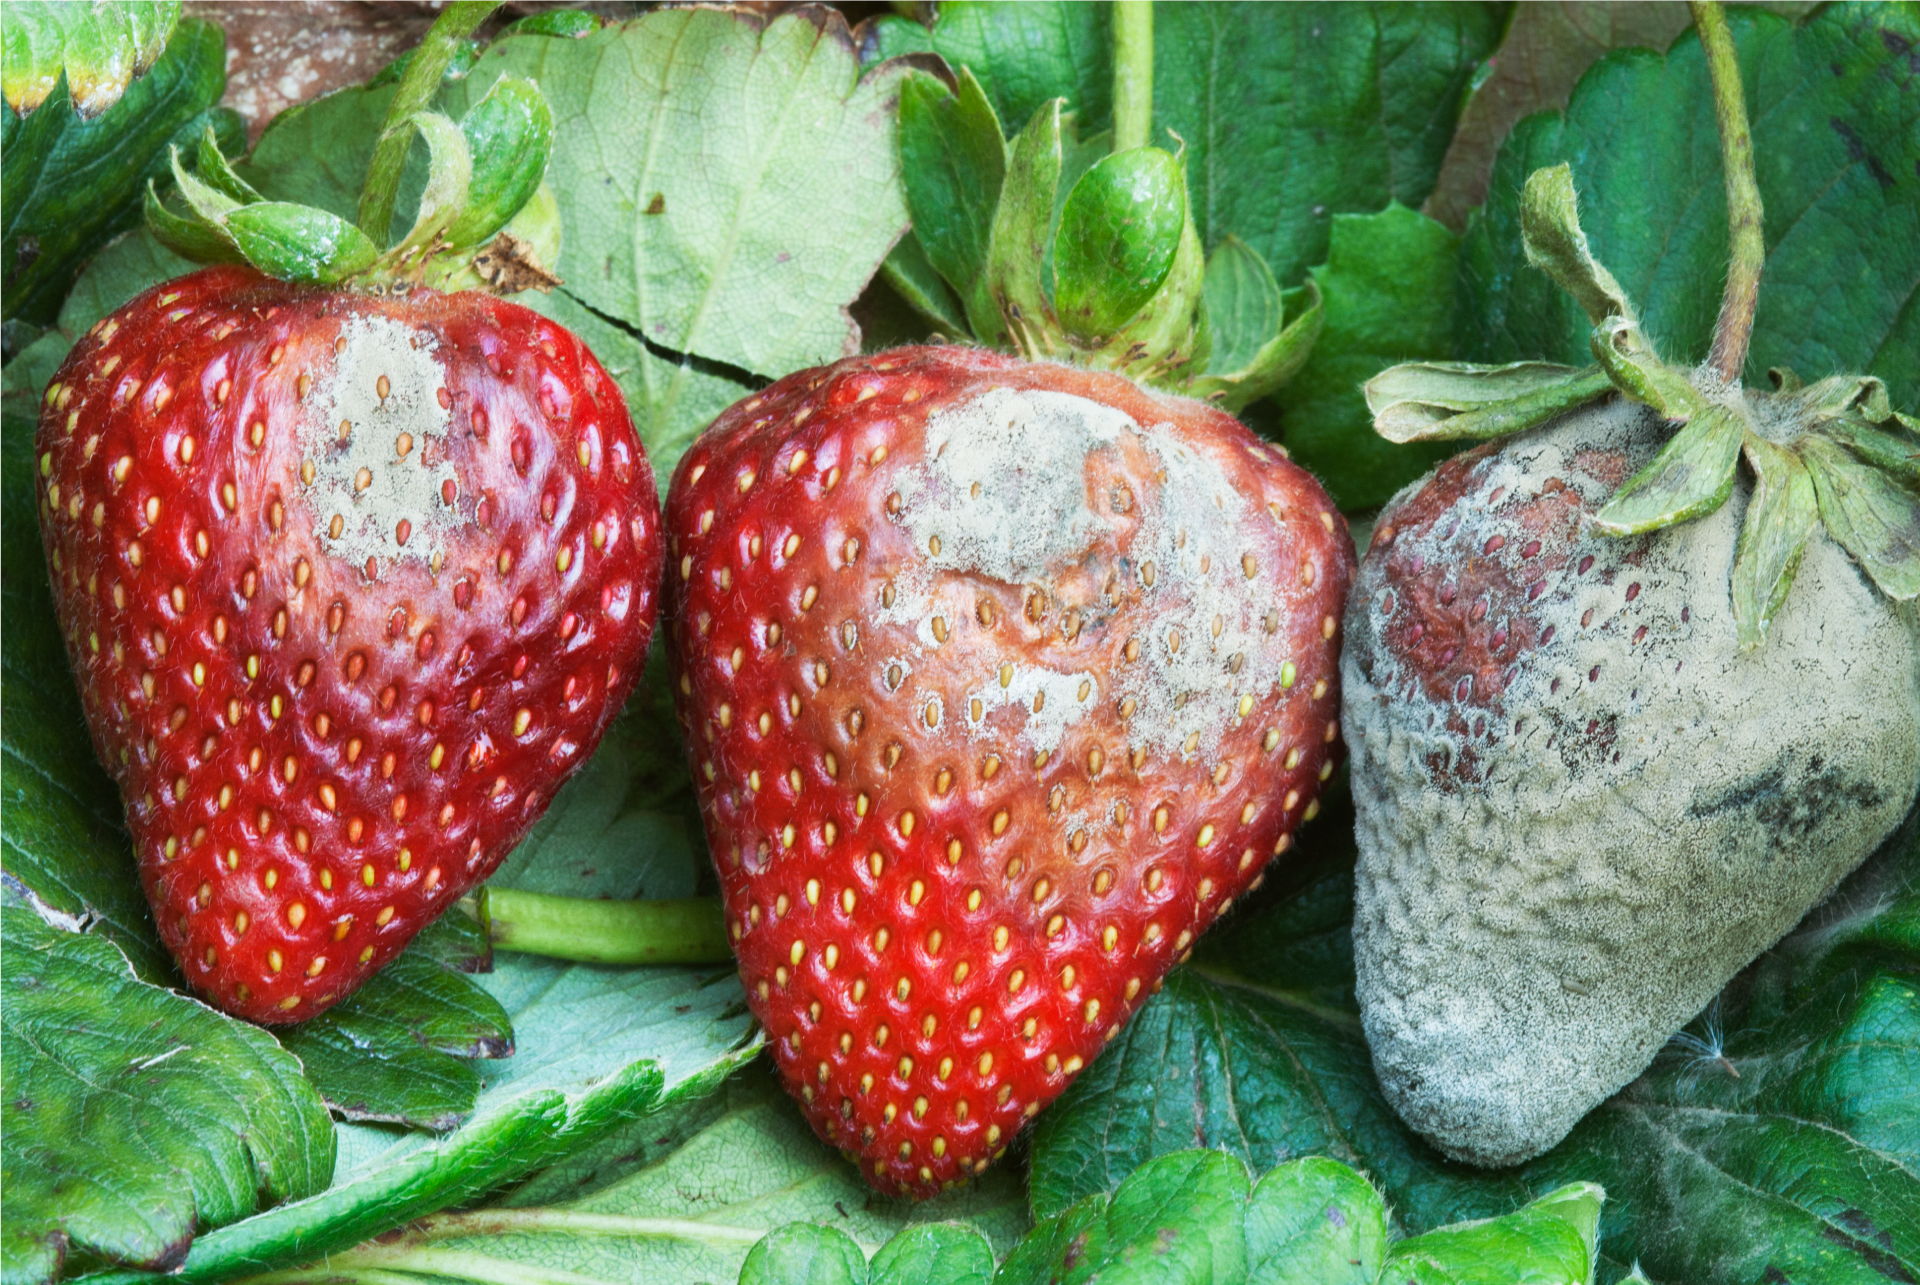 A Treatise on Botrytis Diseases of Strawberry and Caneberry